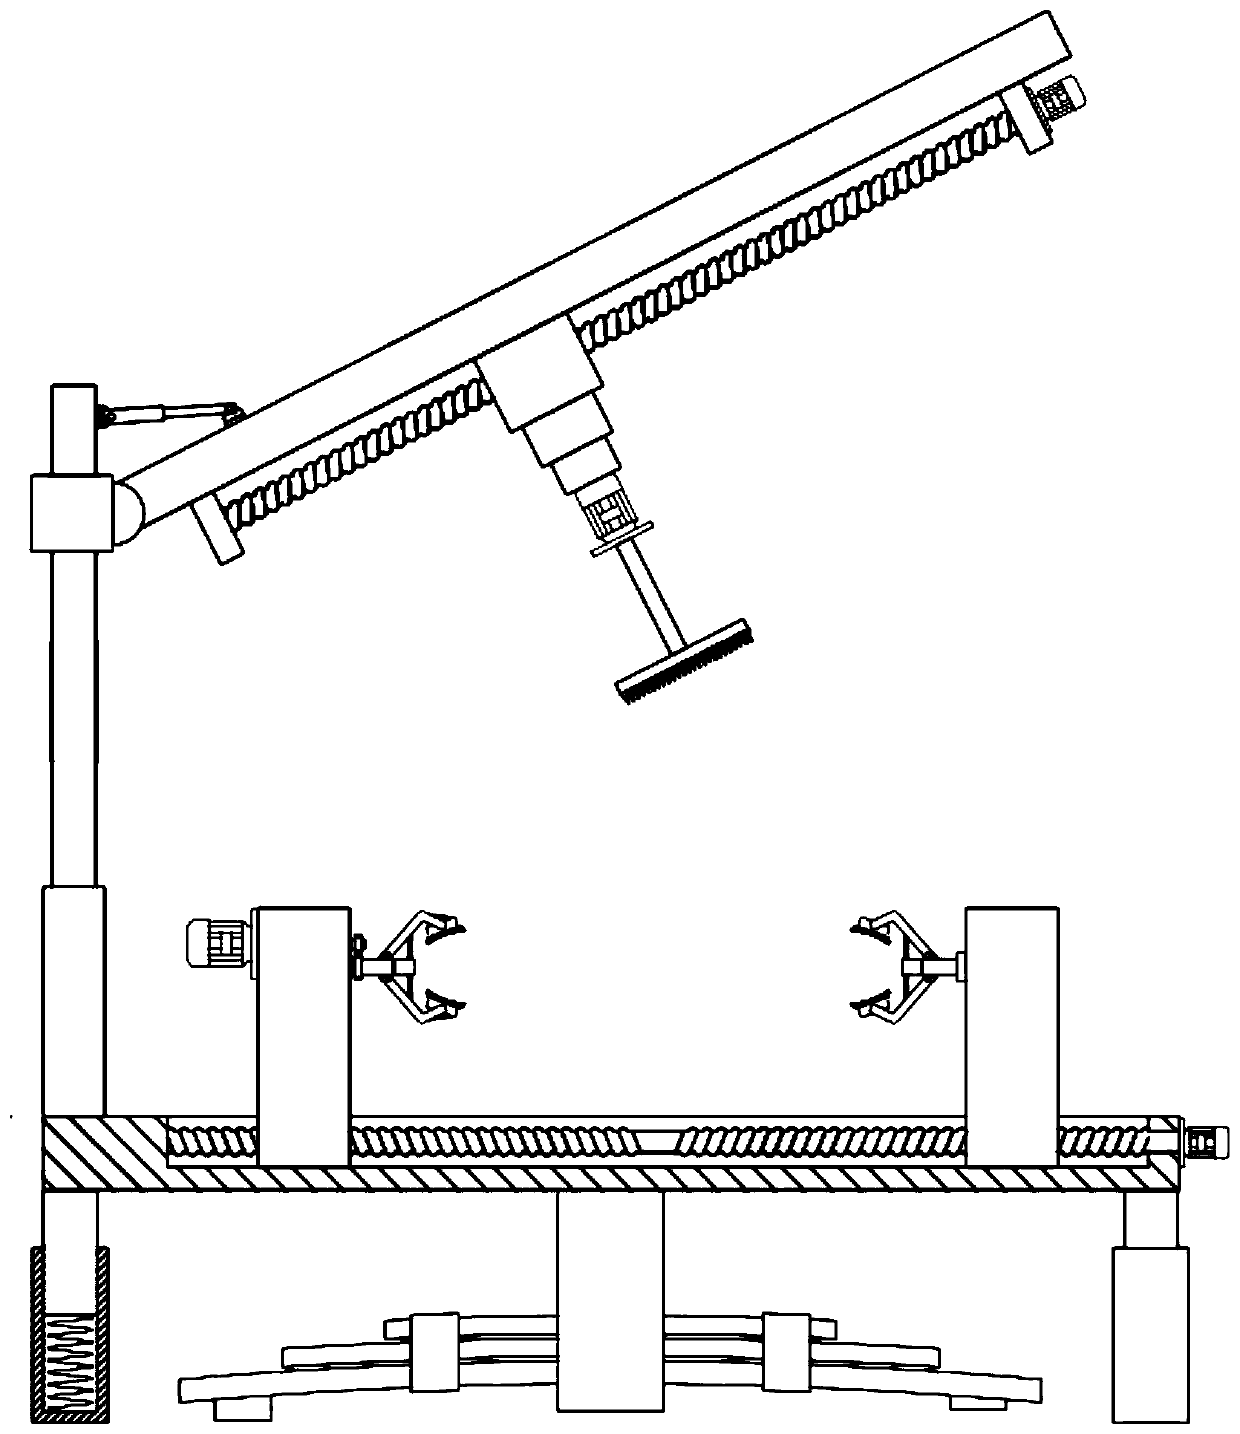 Overturning grinding rust removal device for metal plate